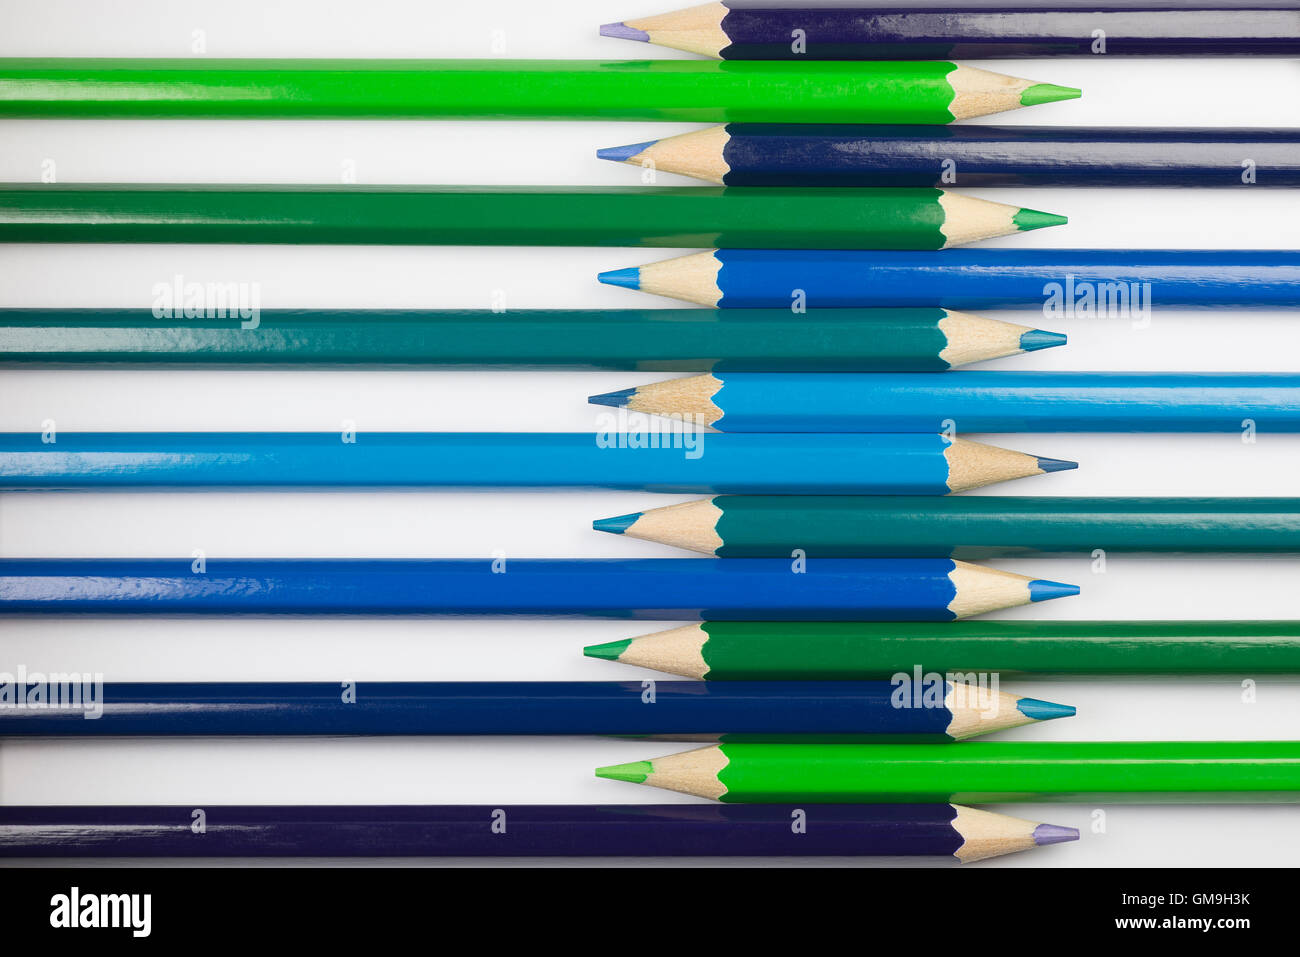 Collection of colorful pencils as a background picture Stock Photo